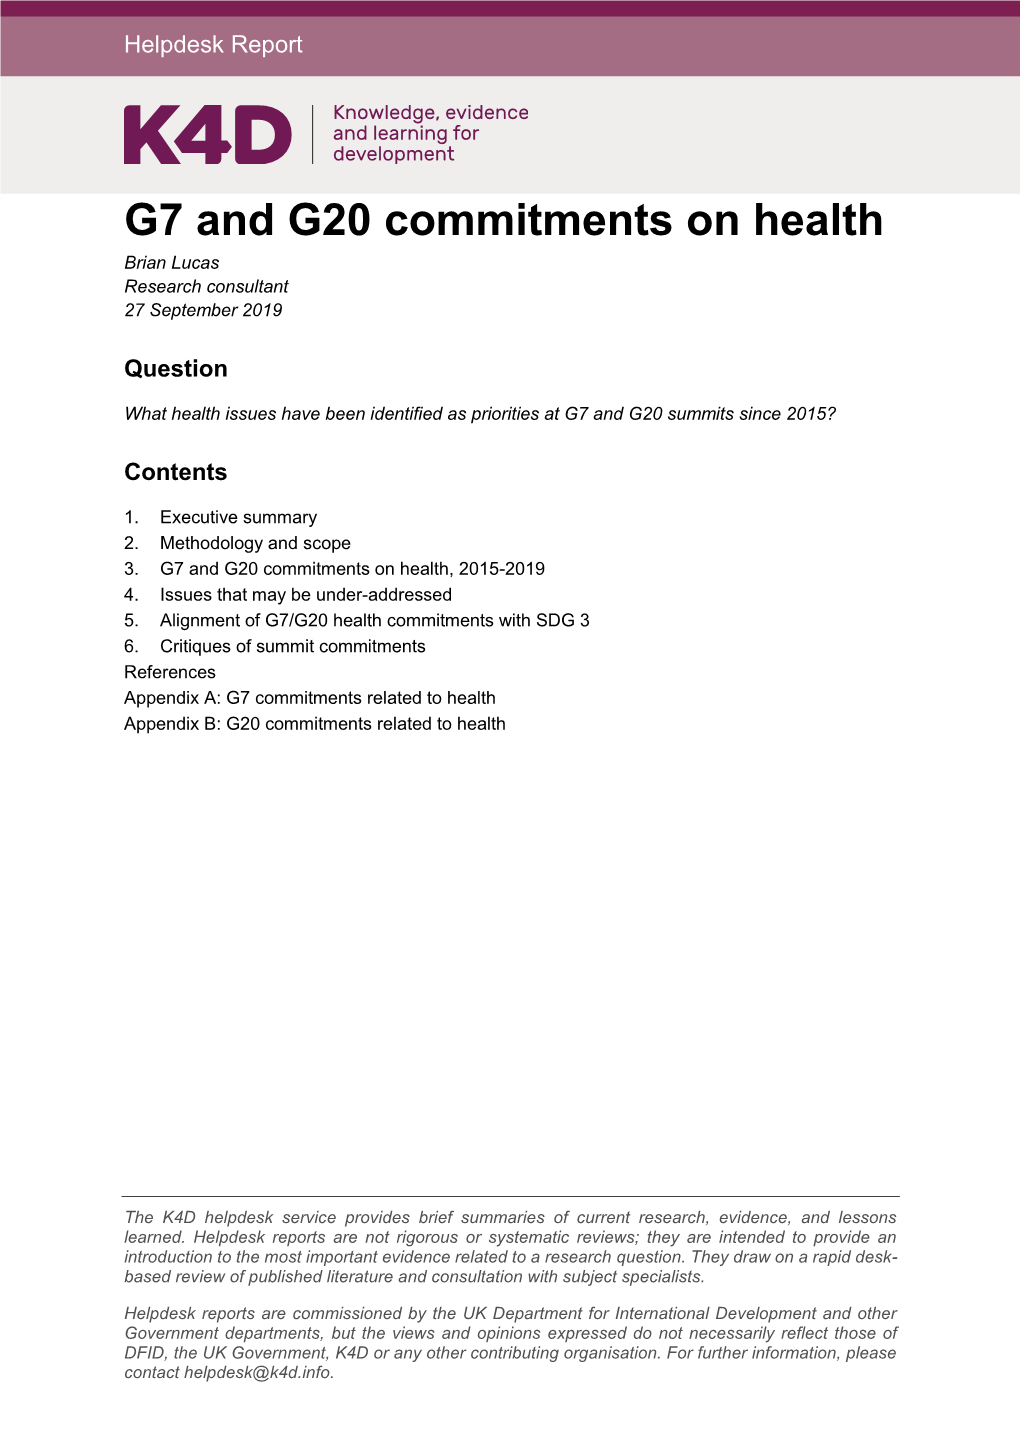 G7 and G20 Commitments on Health Brian Lucas Research Consultant 27 September 2019